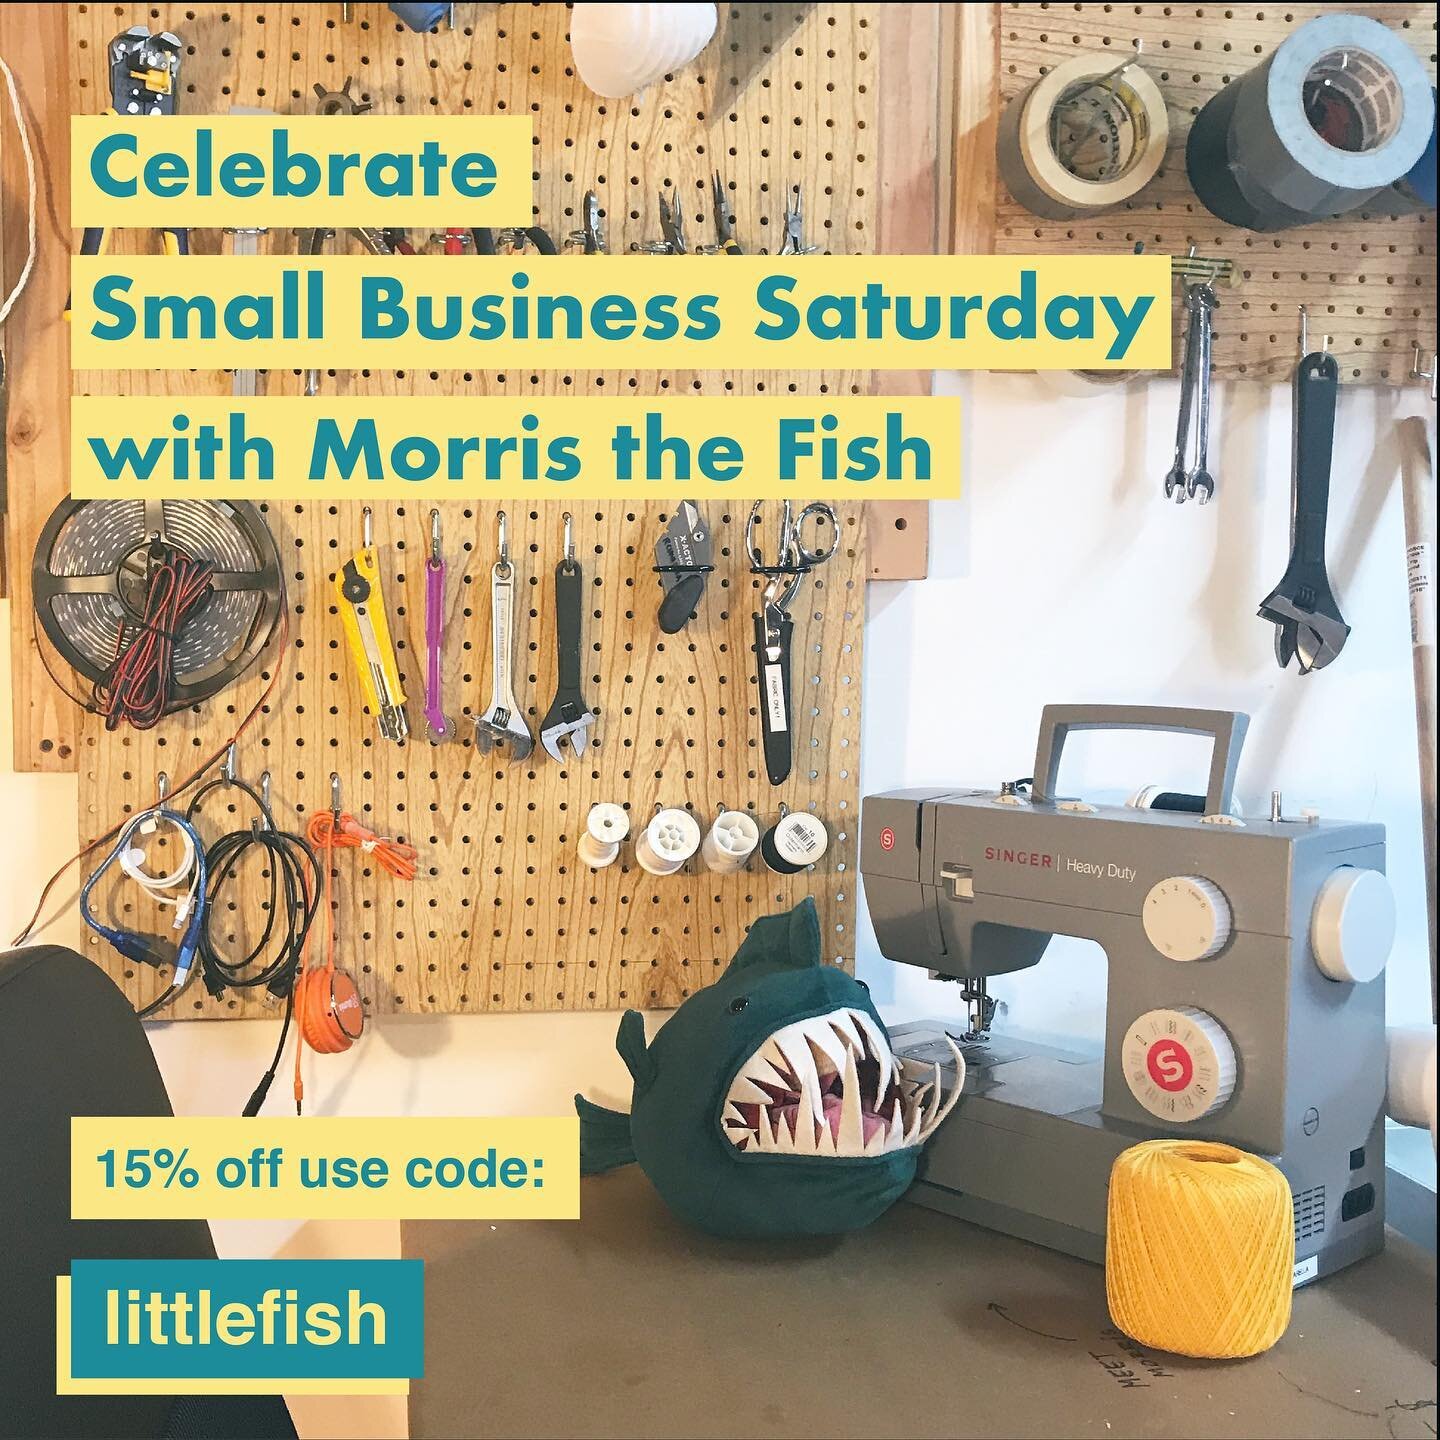 Celebrate small business Saturday with Morris the fish. Use code littlefish for 15% off today 11/28 only!